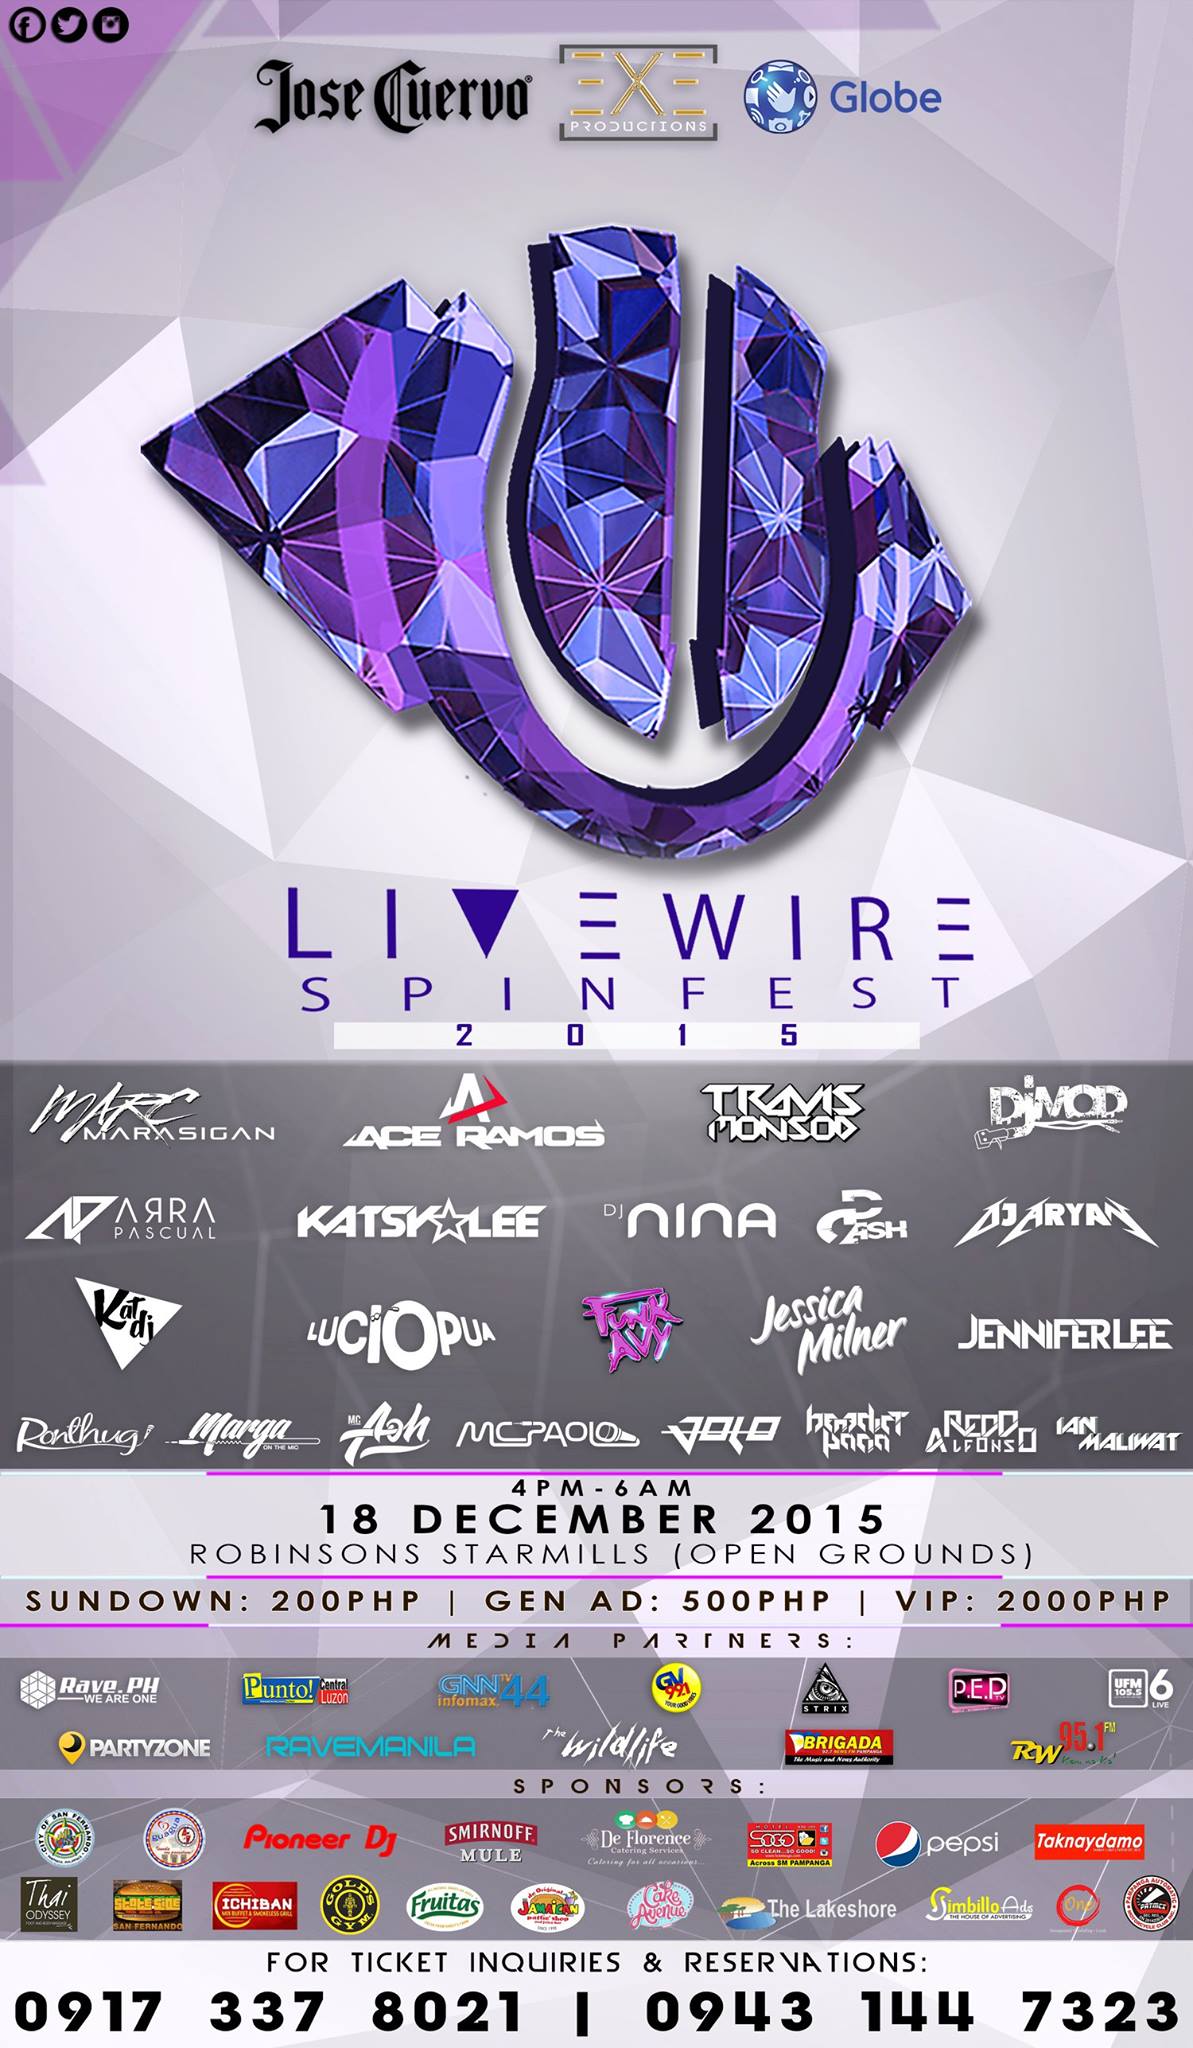 Livewire 2015 clock Friday, December 18 at 3 PM Show Map Robinsons Starmills San Jose, 2000 Sampernandu Its the 2nd year of livewire spinfest. get ready for a massive line ups of DJ's. ---- Get ready to Live Feel Rave! at Livewire Spinfest! For ticket inquiries & reservations: 0917 337 8021 / 0943 144 7323 #LivewirePH2015 #CuervoLivewire #GlobeLivewire #LiveFeelRave #BeAlive